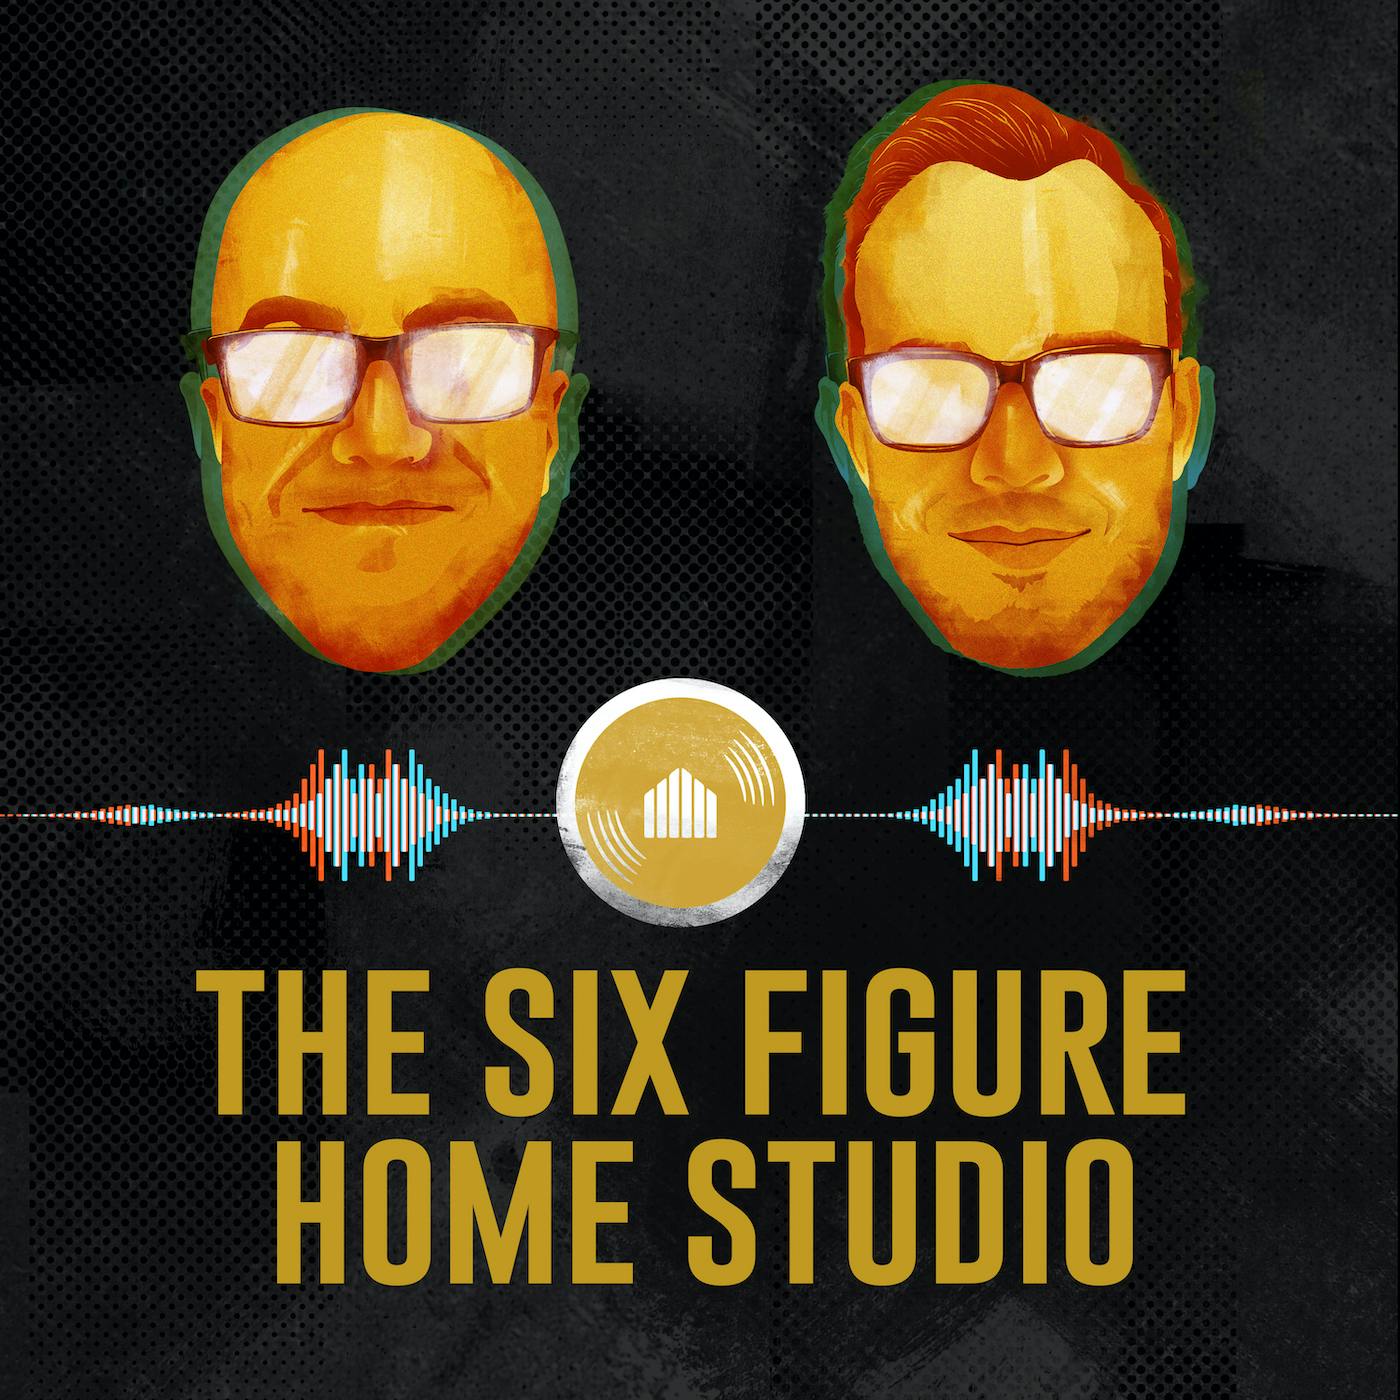 #150: Is This The Final Episode Of The Six Figure Home Studio Podcast?